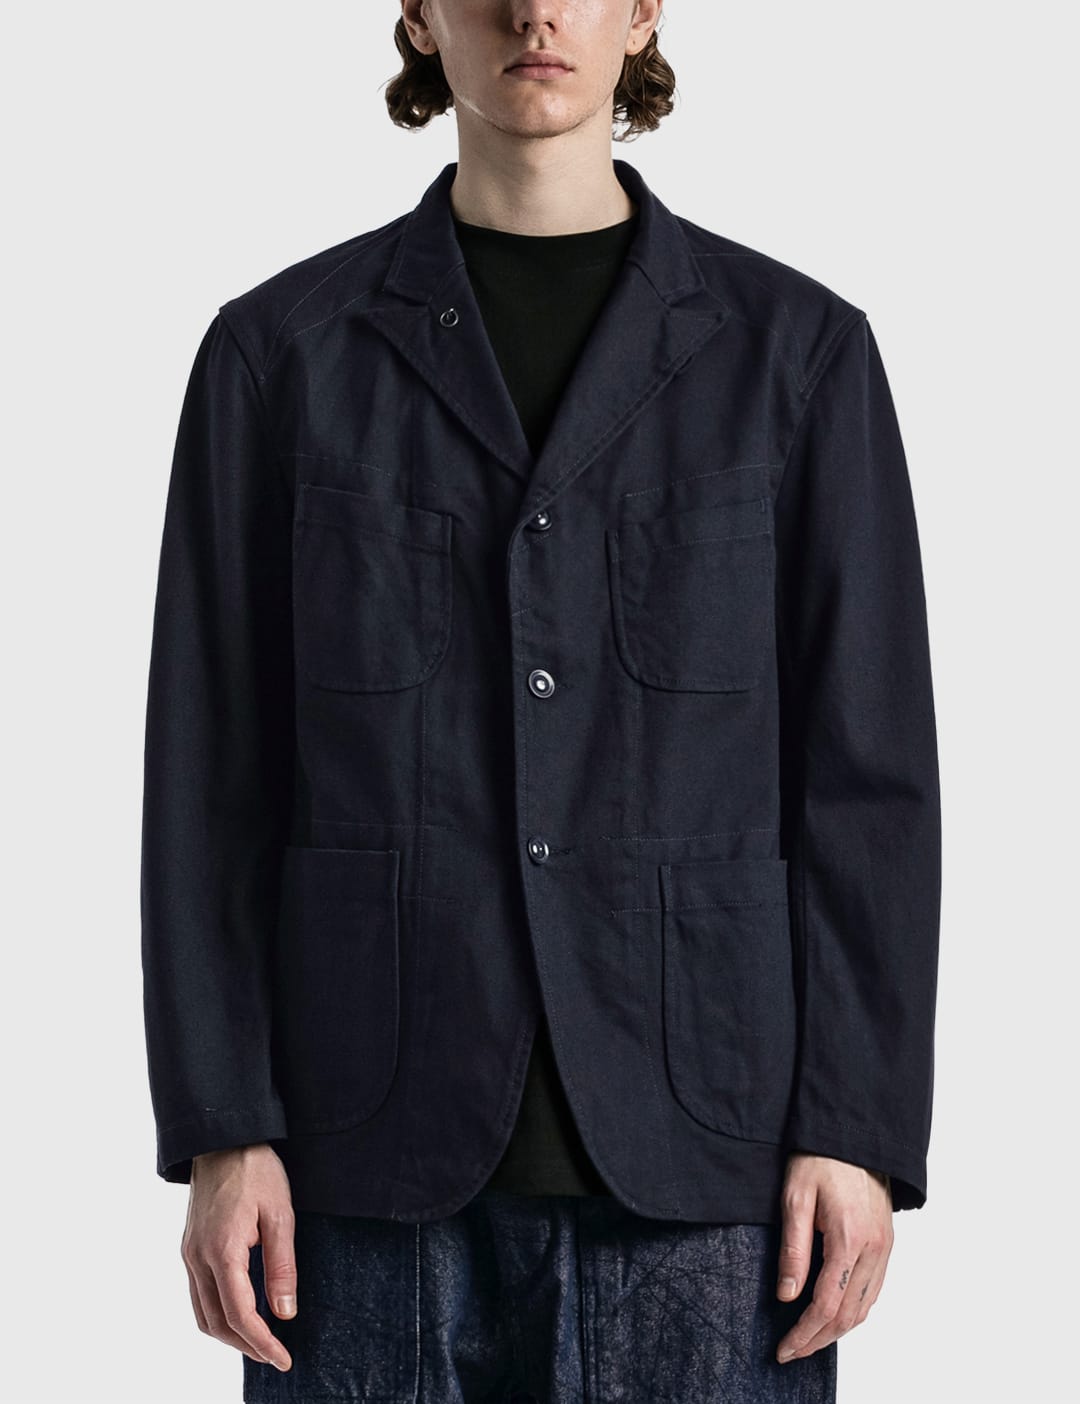 Engineered Garments   BEDFORD JACKET   HBX   Globally Curated